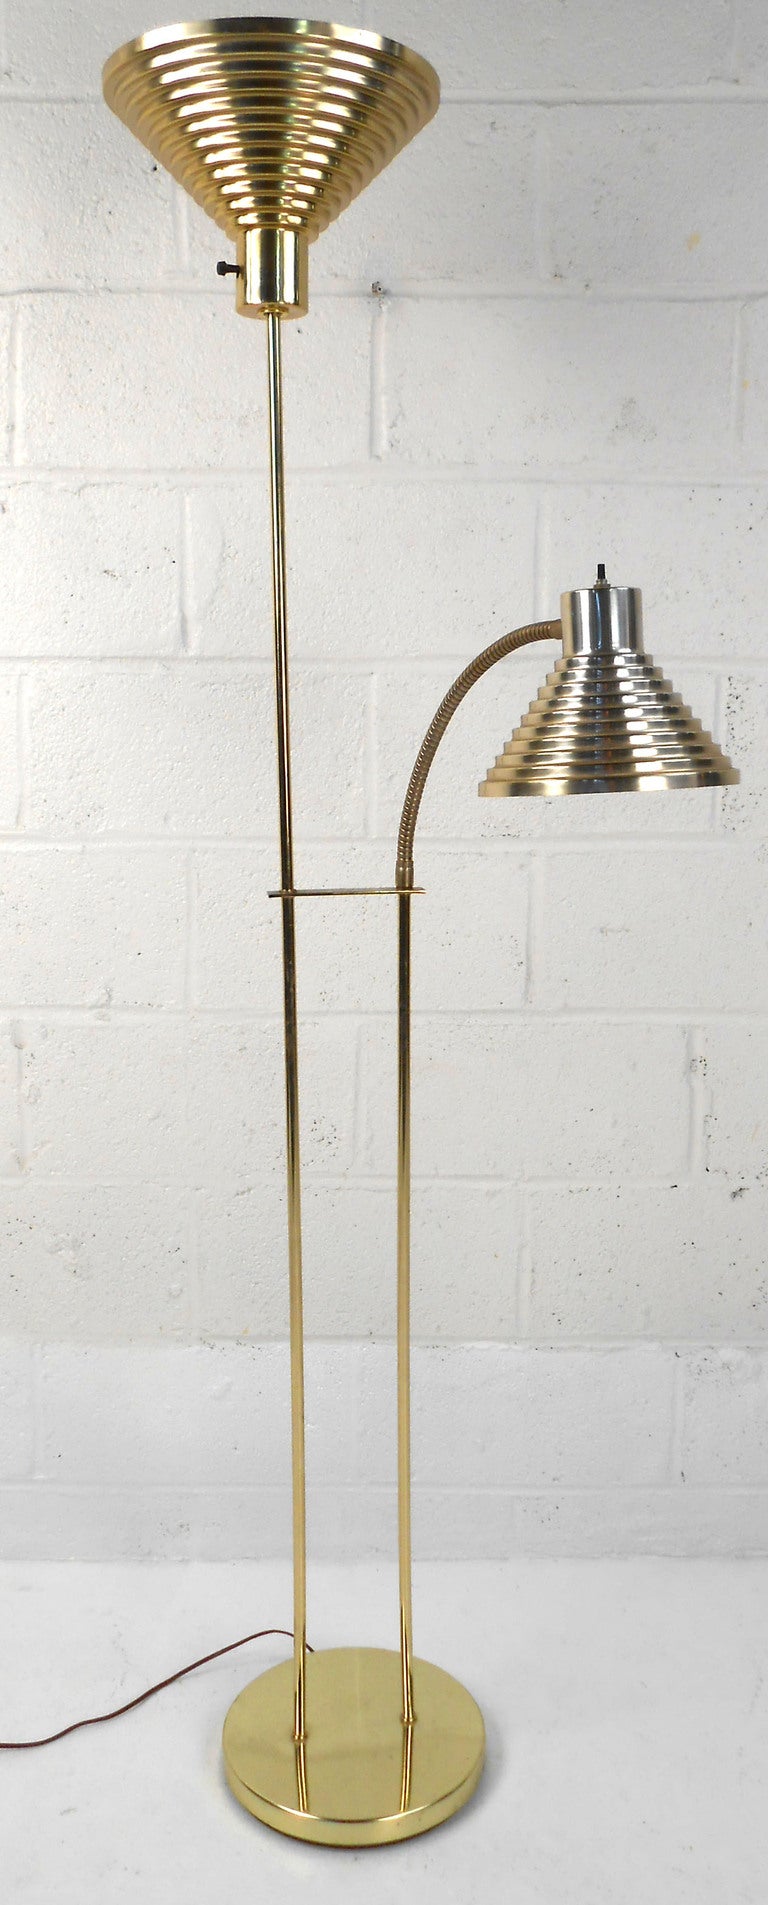 This stylish brass floor lamp has both a room and reading light, and features stylish Italian modern design. 

Please confirm item location (NY or NJ).